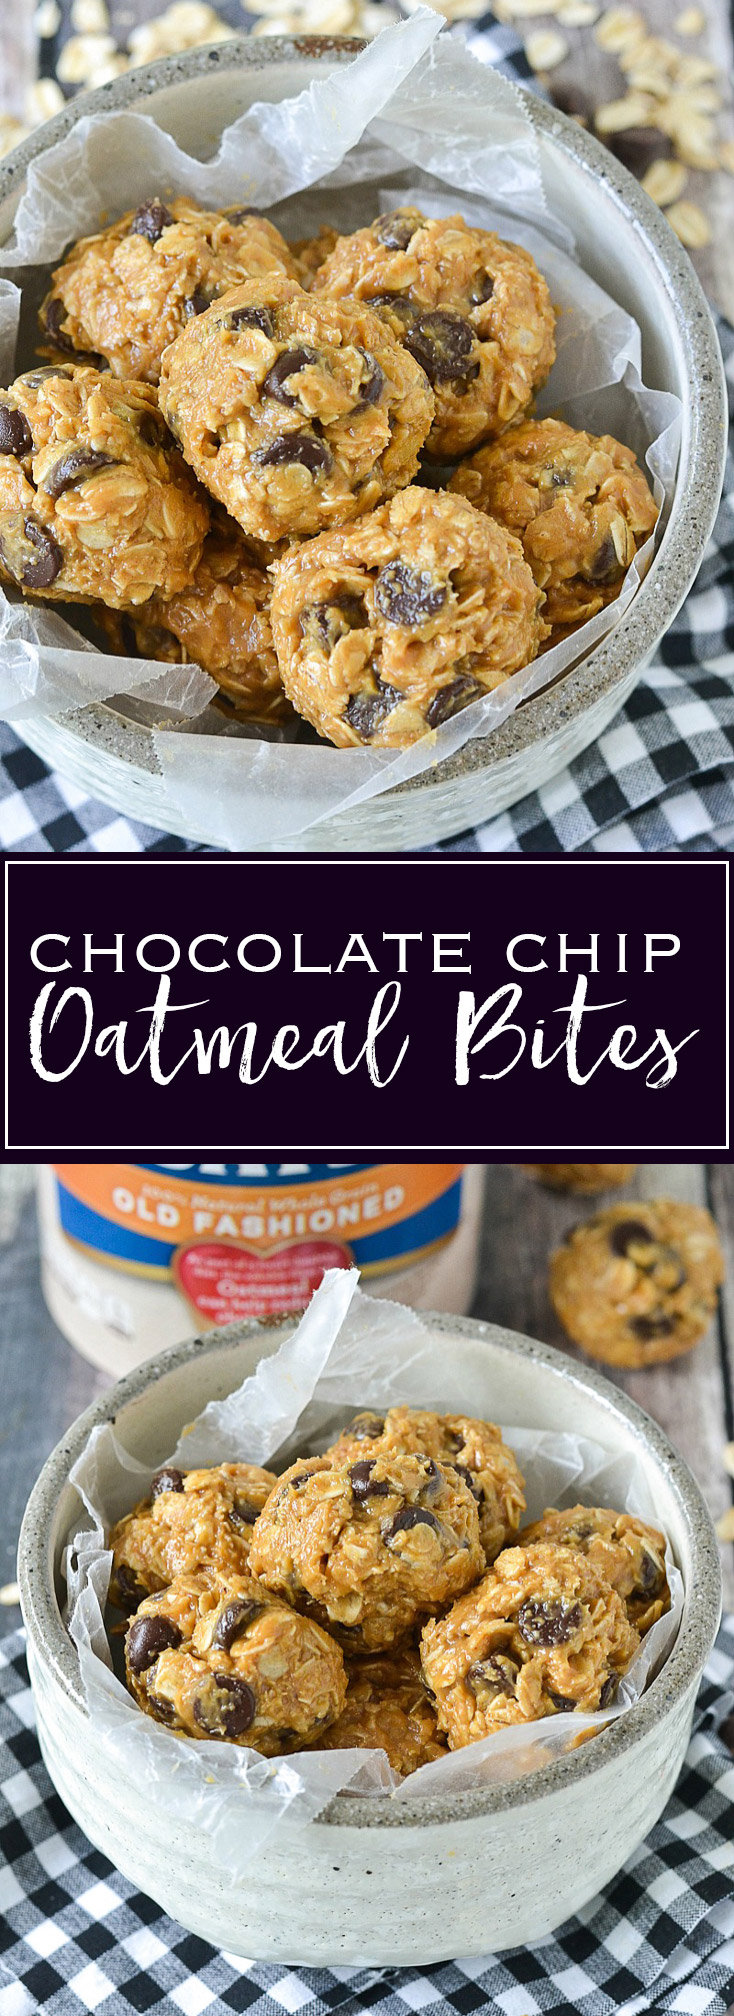 Chocolate Chip Oatmeal Bites | www.motherthyme.com